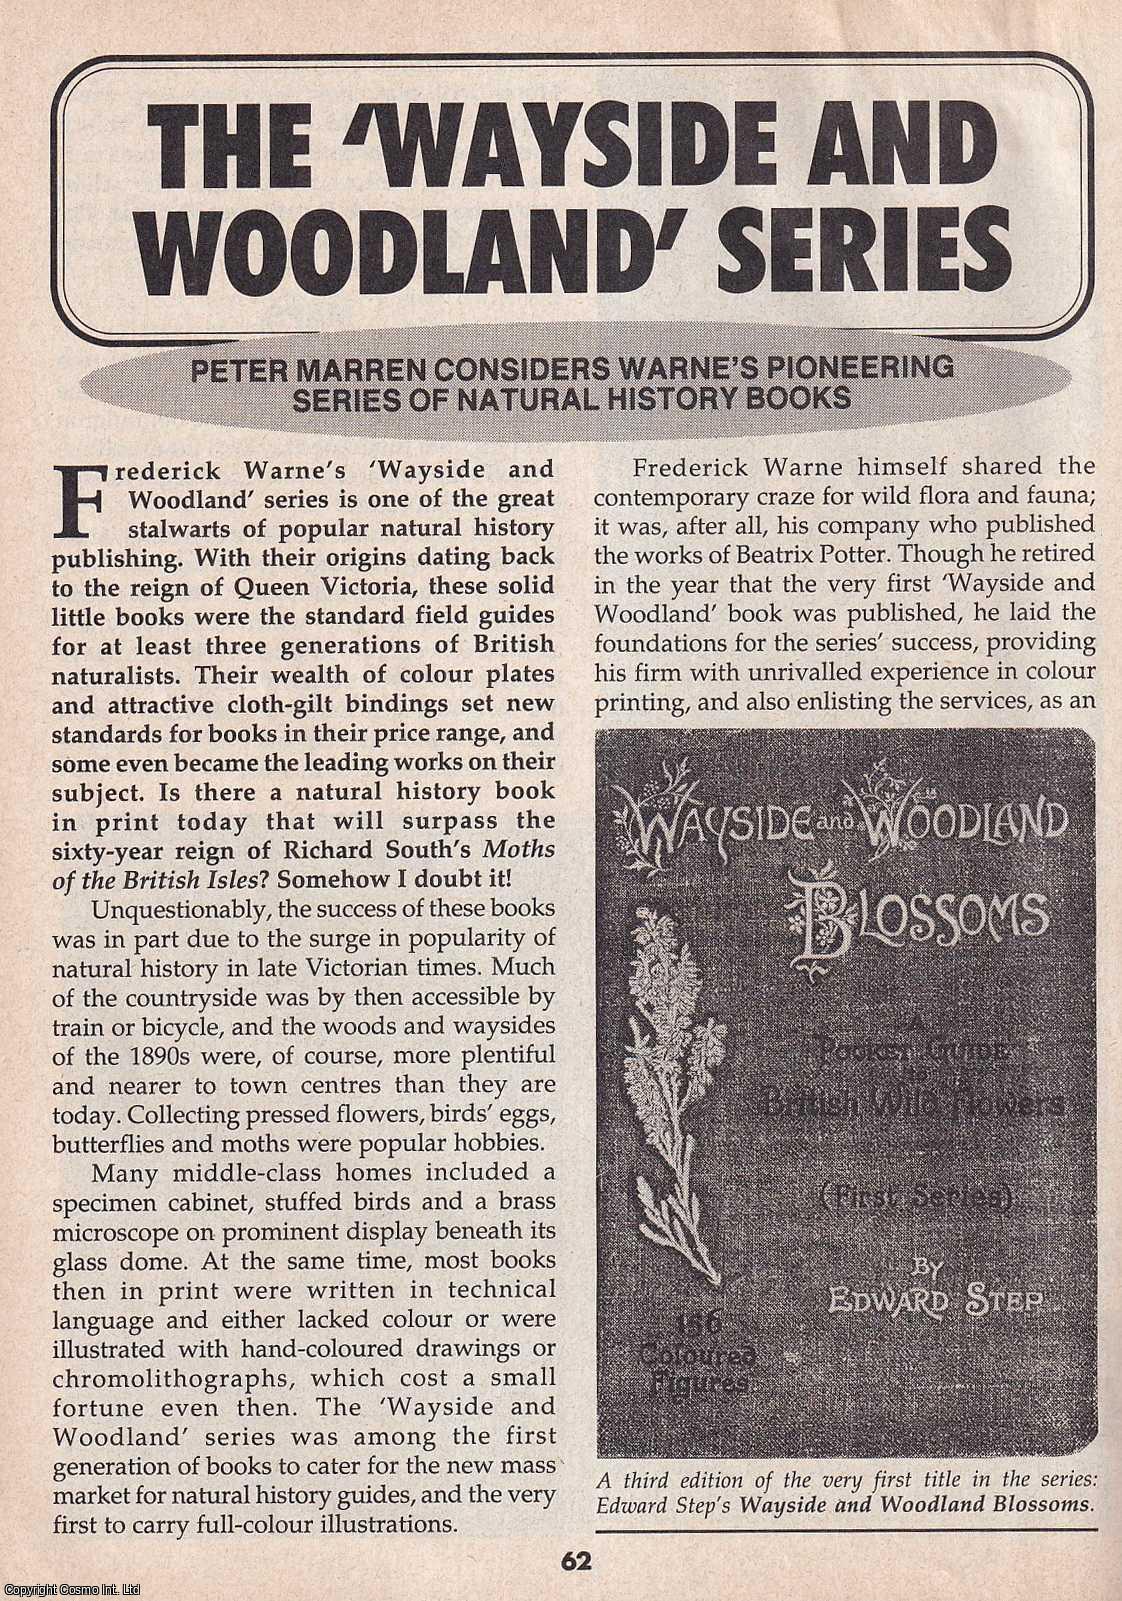 Peter Marren - The Wayside and Woodland Series. Considering Warne's Pioneering Series of Natural History Books. This is an original article separated from an issue of The Book & Magazine Collector publication.